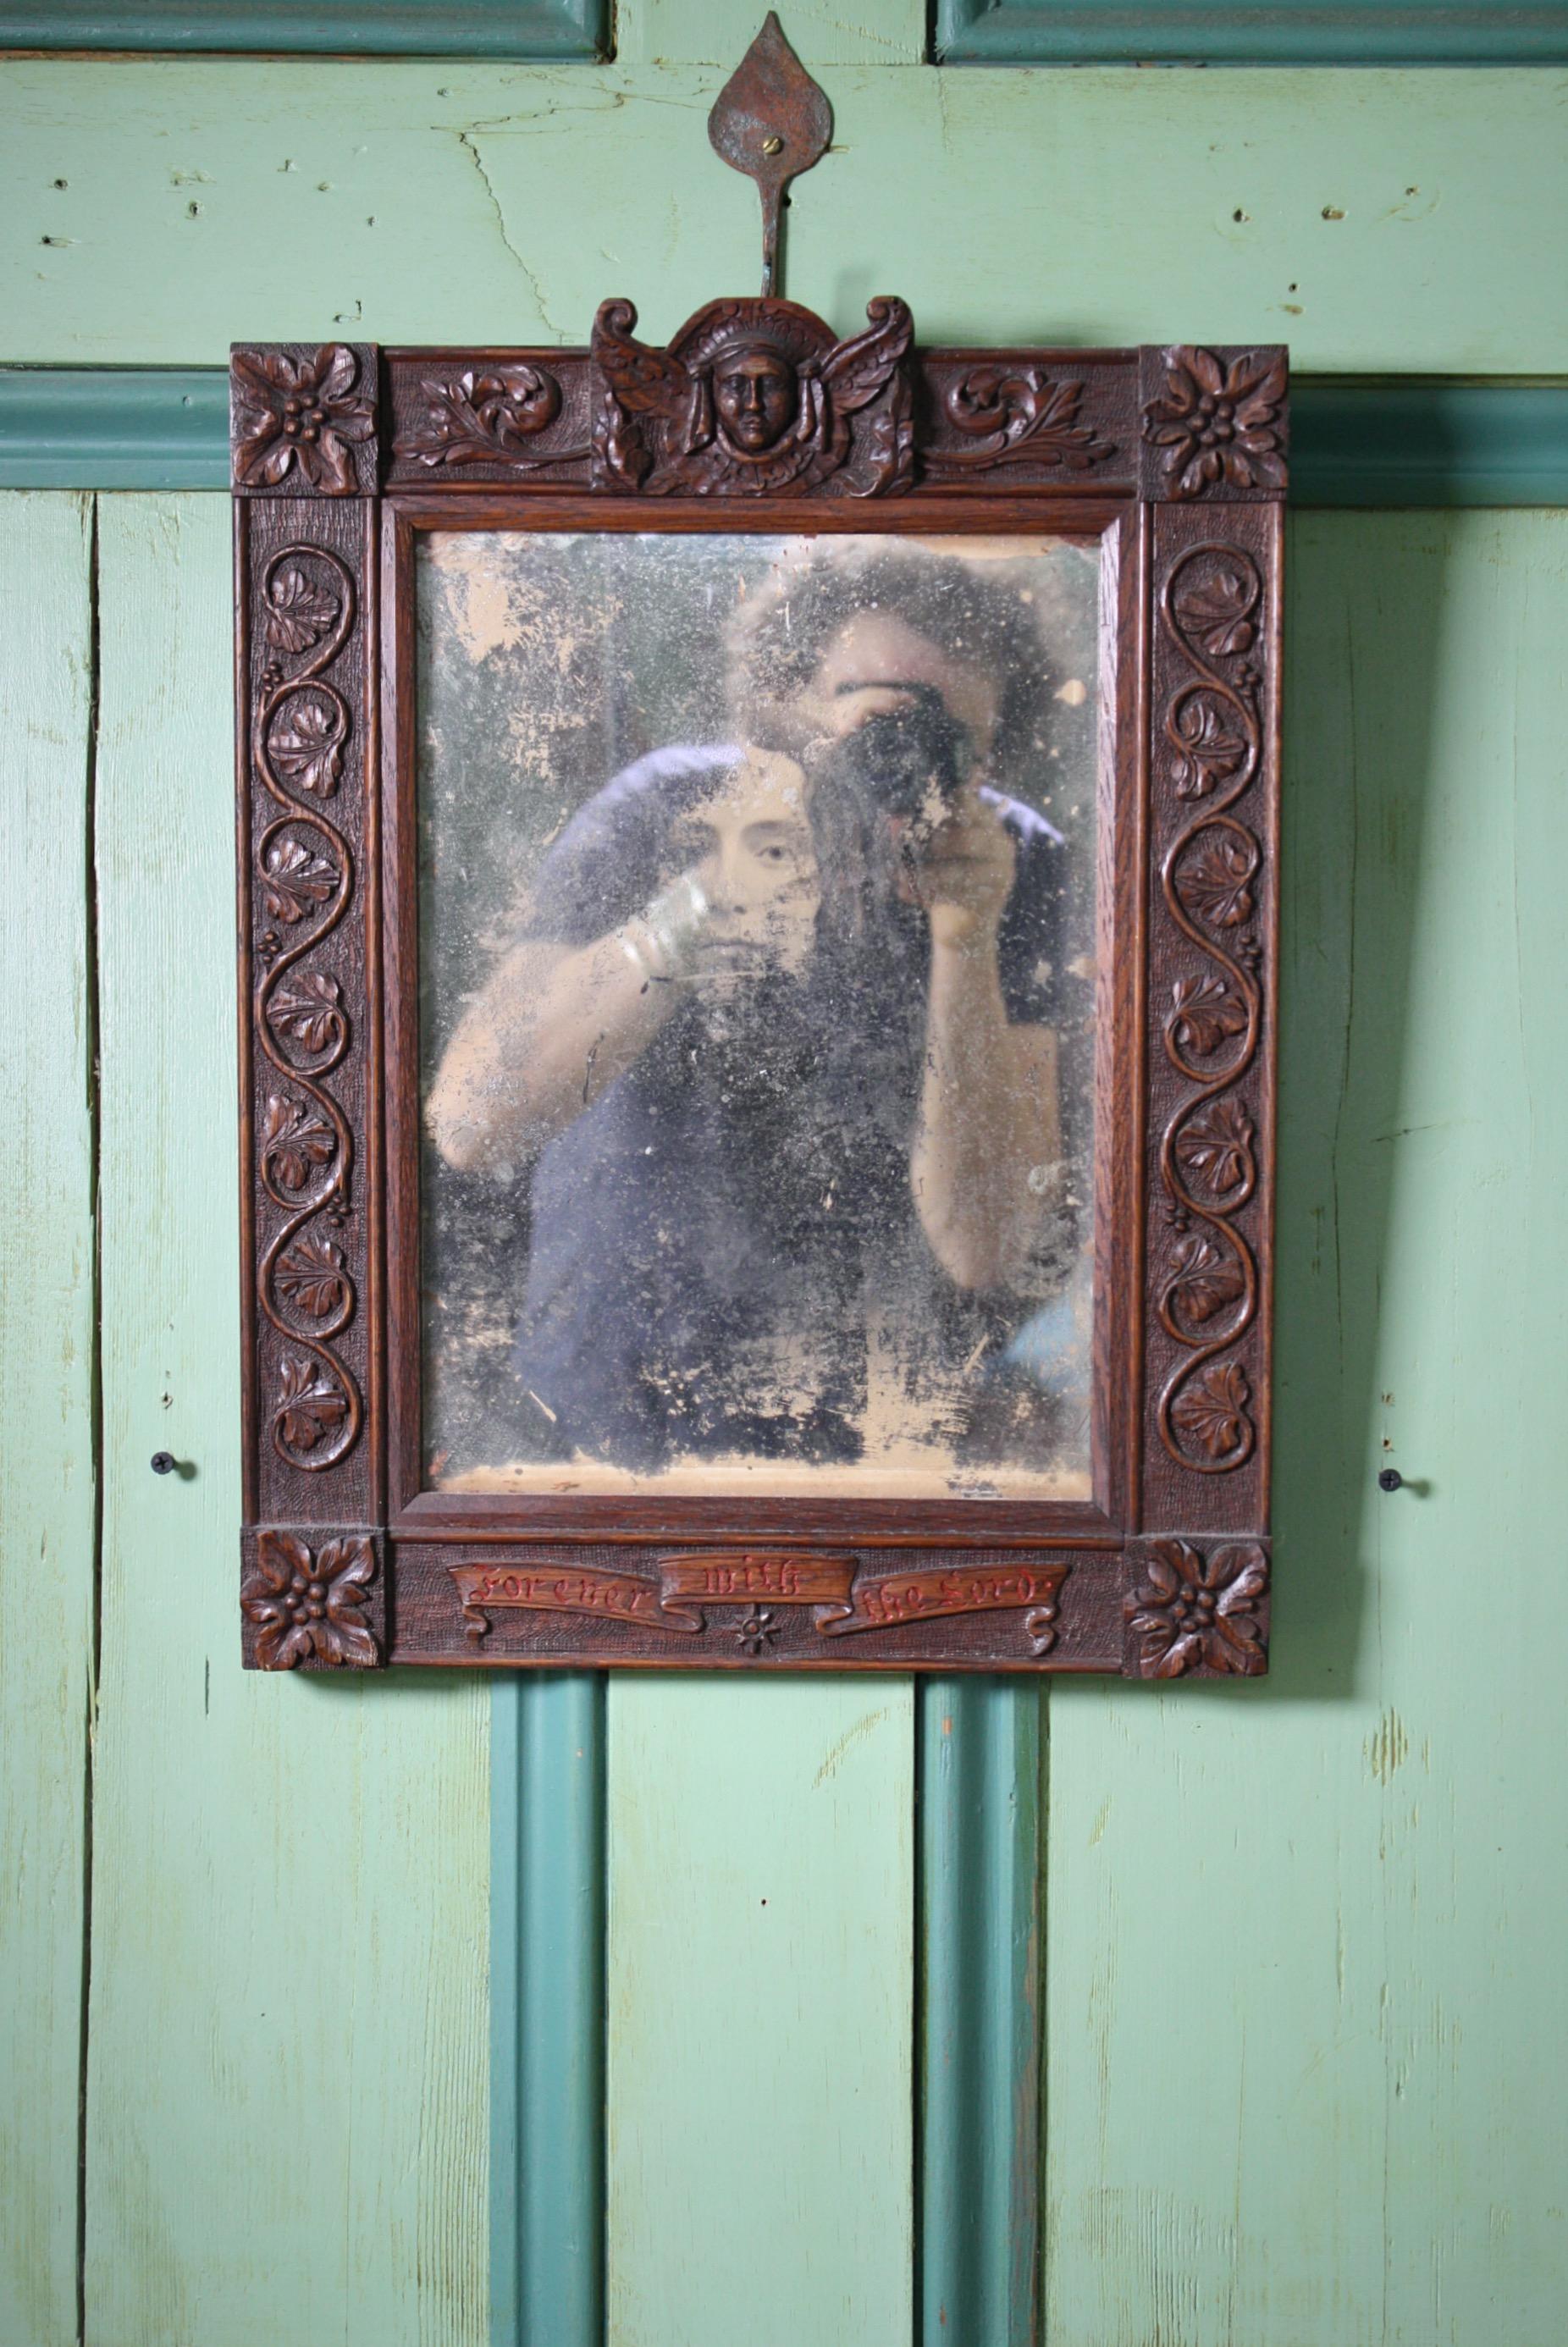 Early 20th Century Memento Mori Reminder Curiosity Face in the Mirror 2